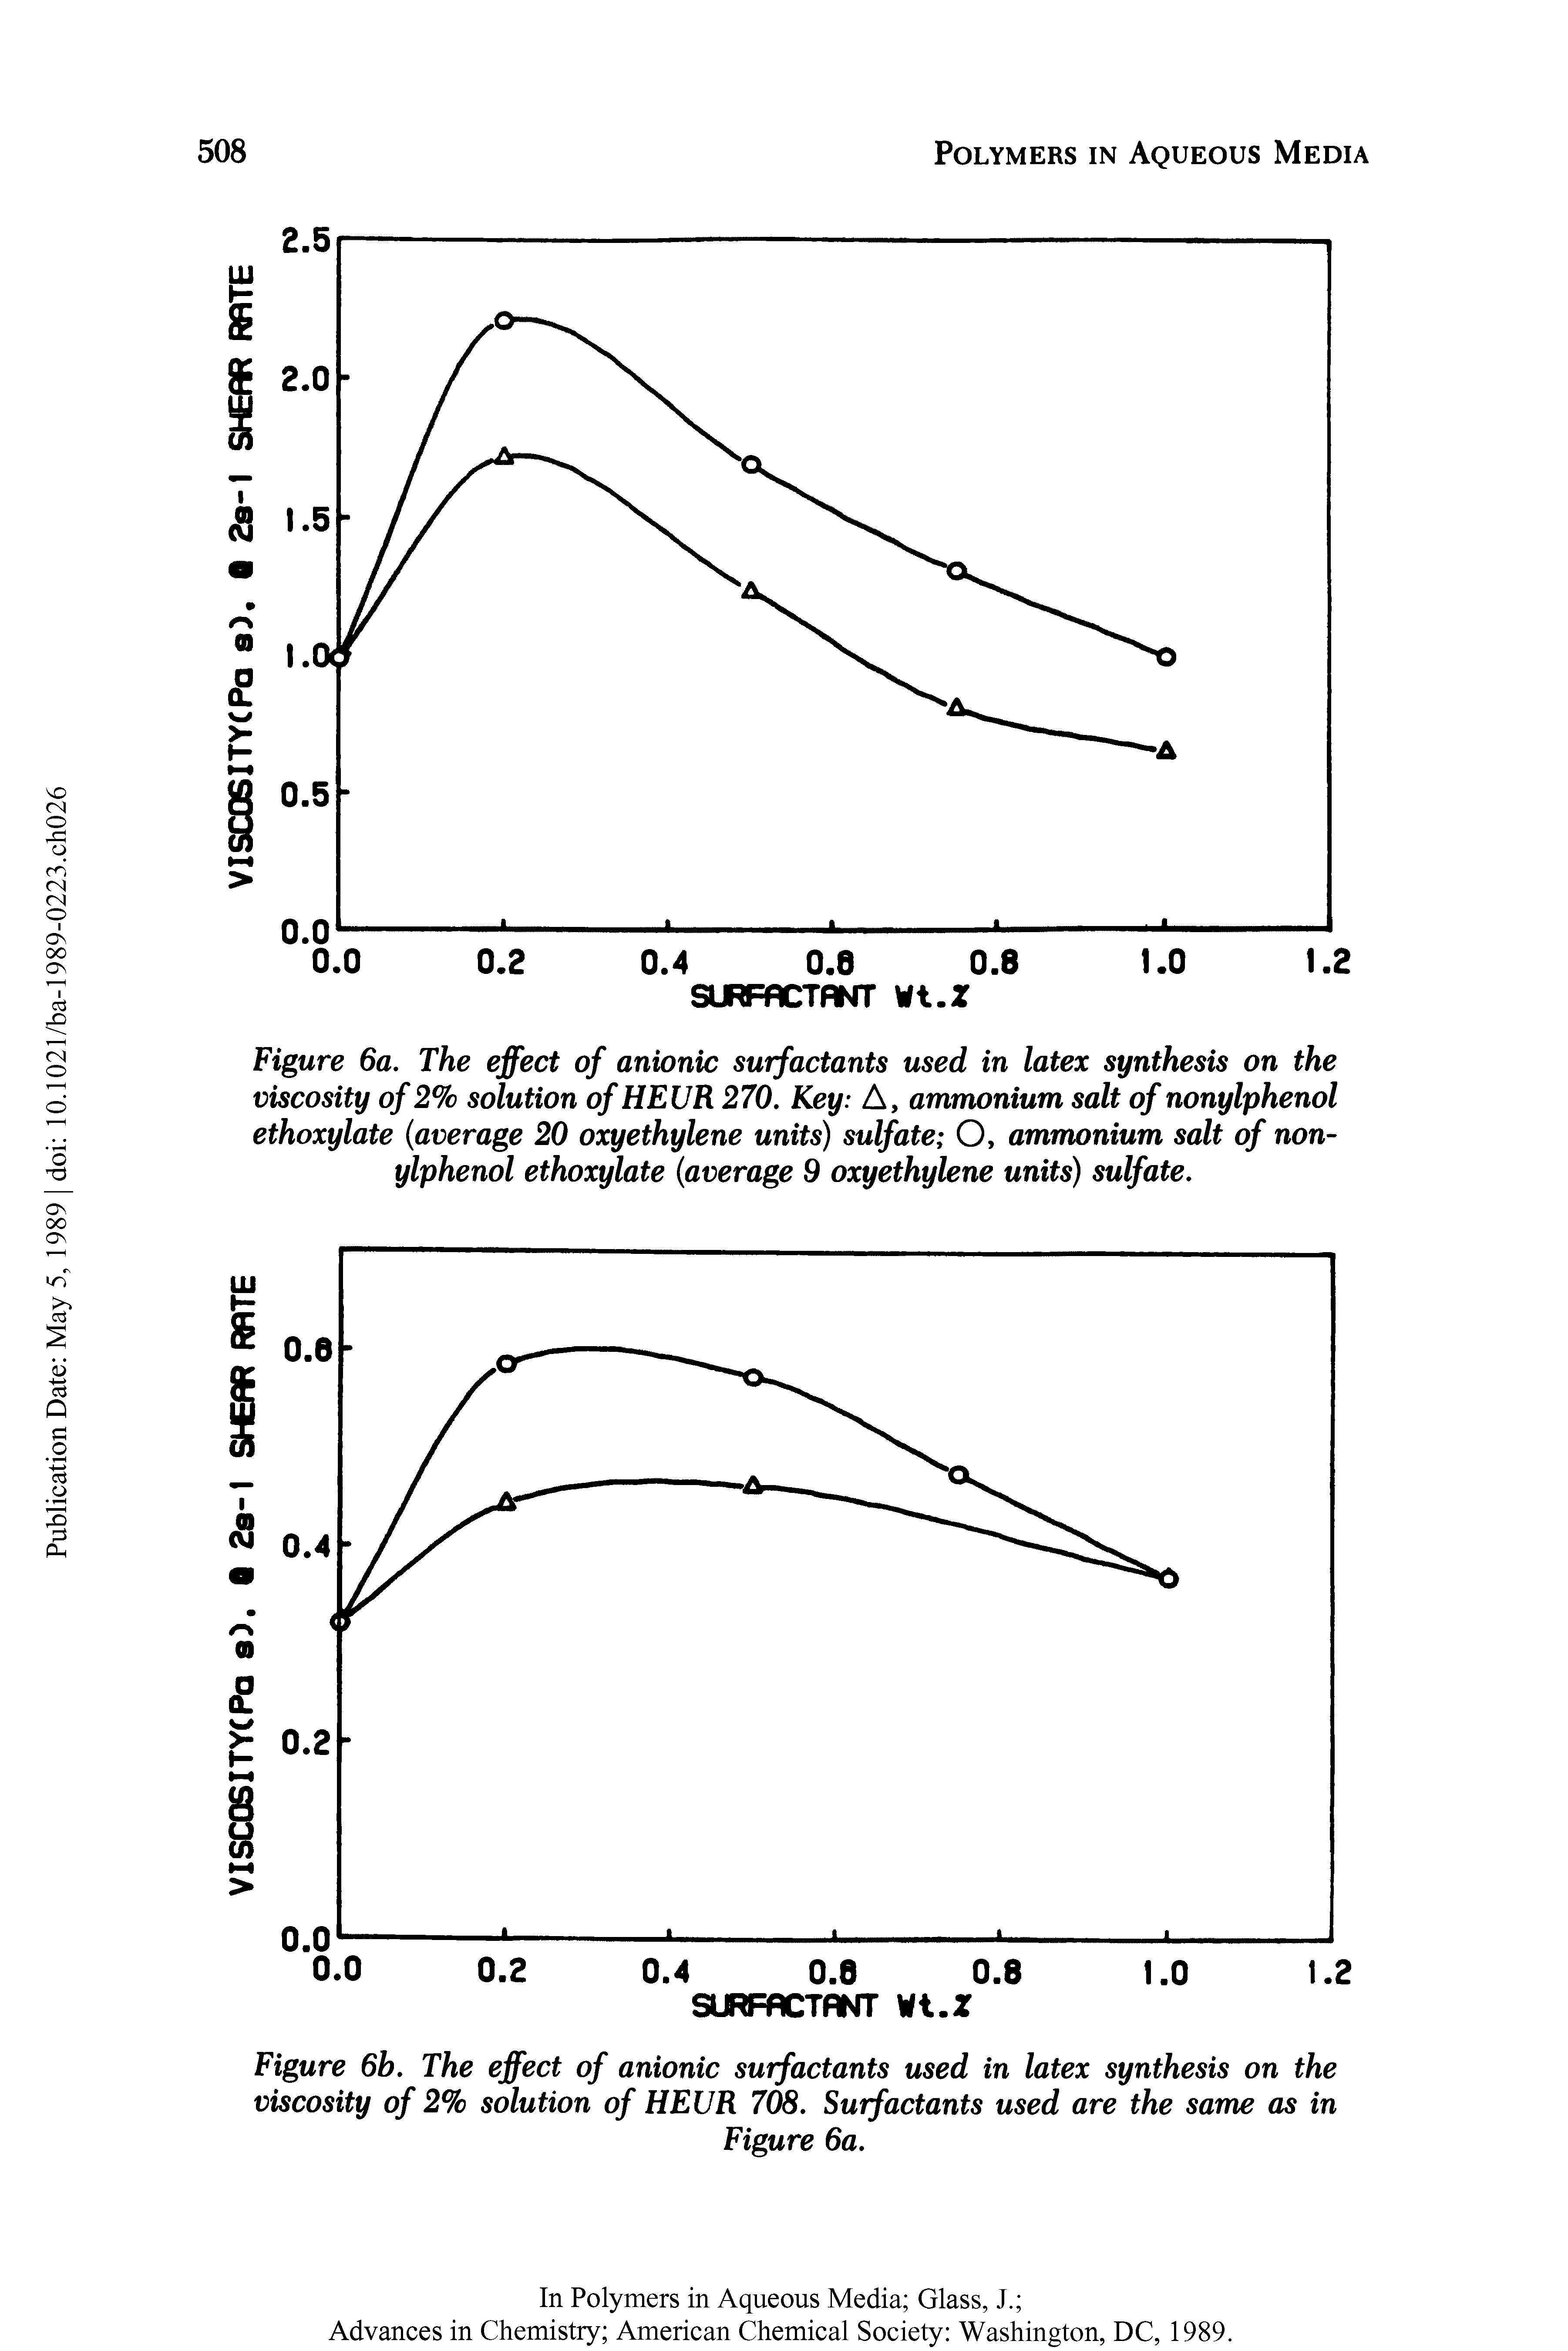 Figure 6a. The effect of anionic surfactants used in latex synthesis on the viscosity of 2% solution of HEUR 270. Key A, ammonium salt of nonylphenol ethoxylate average 20 oxyethylene units) sulfate O, ammonium salt of nonylphenol ethoxylate average 9 oxyethylene units) sulfate.